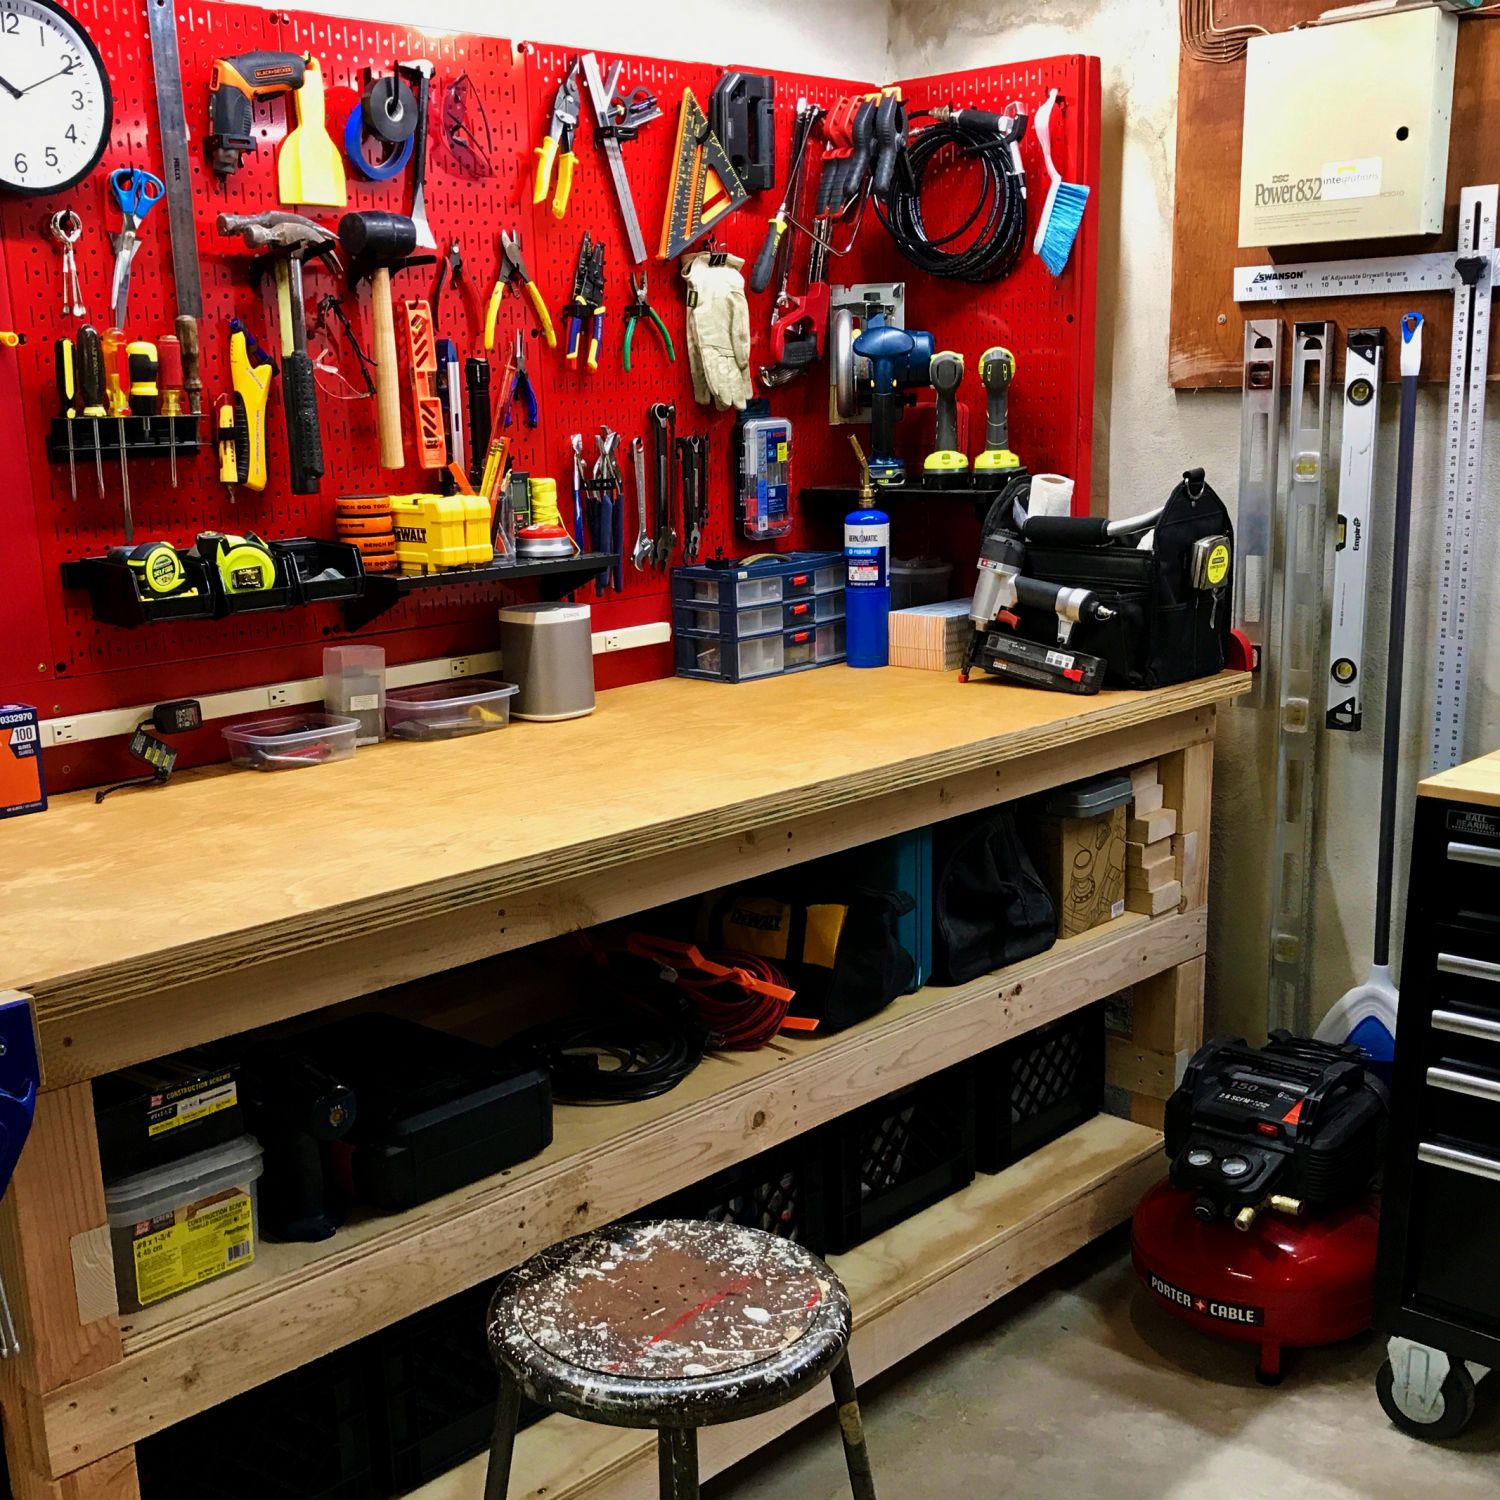 Wooden work bench with red peg board covered in tools